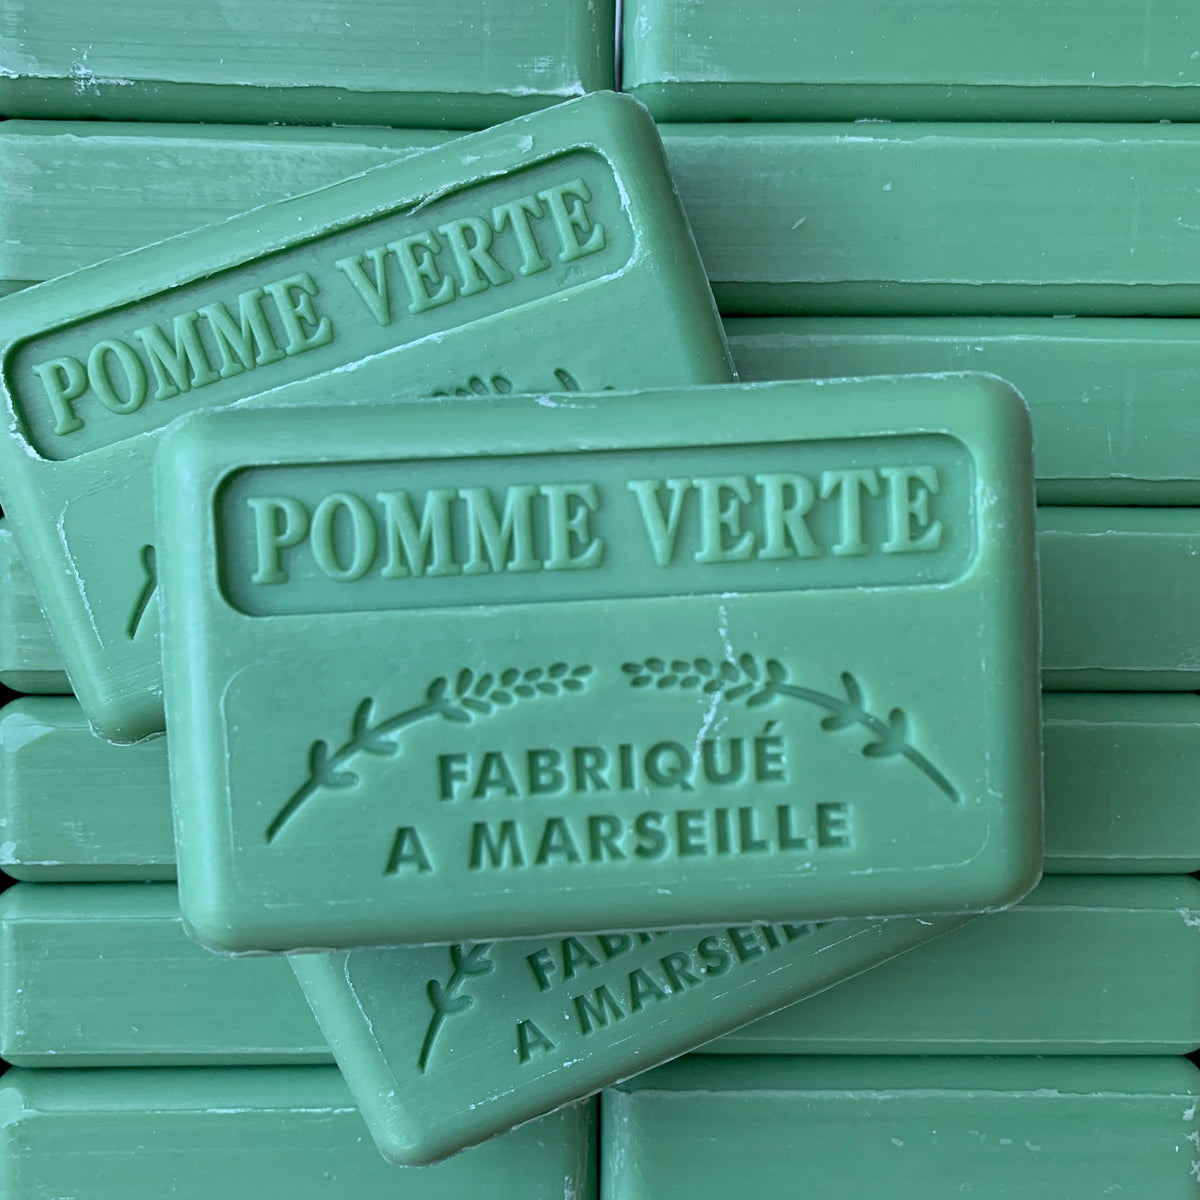 green apple french soap